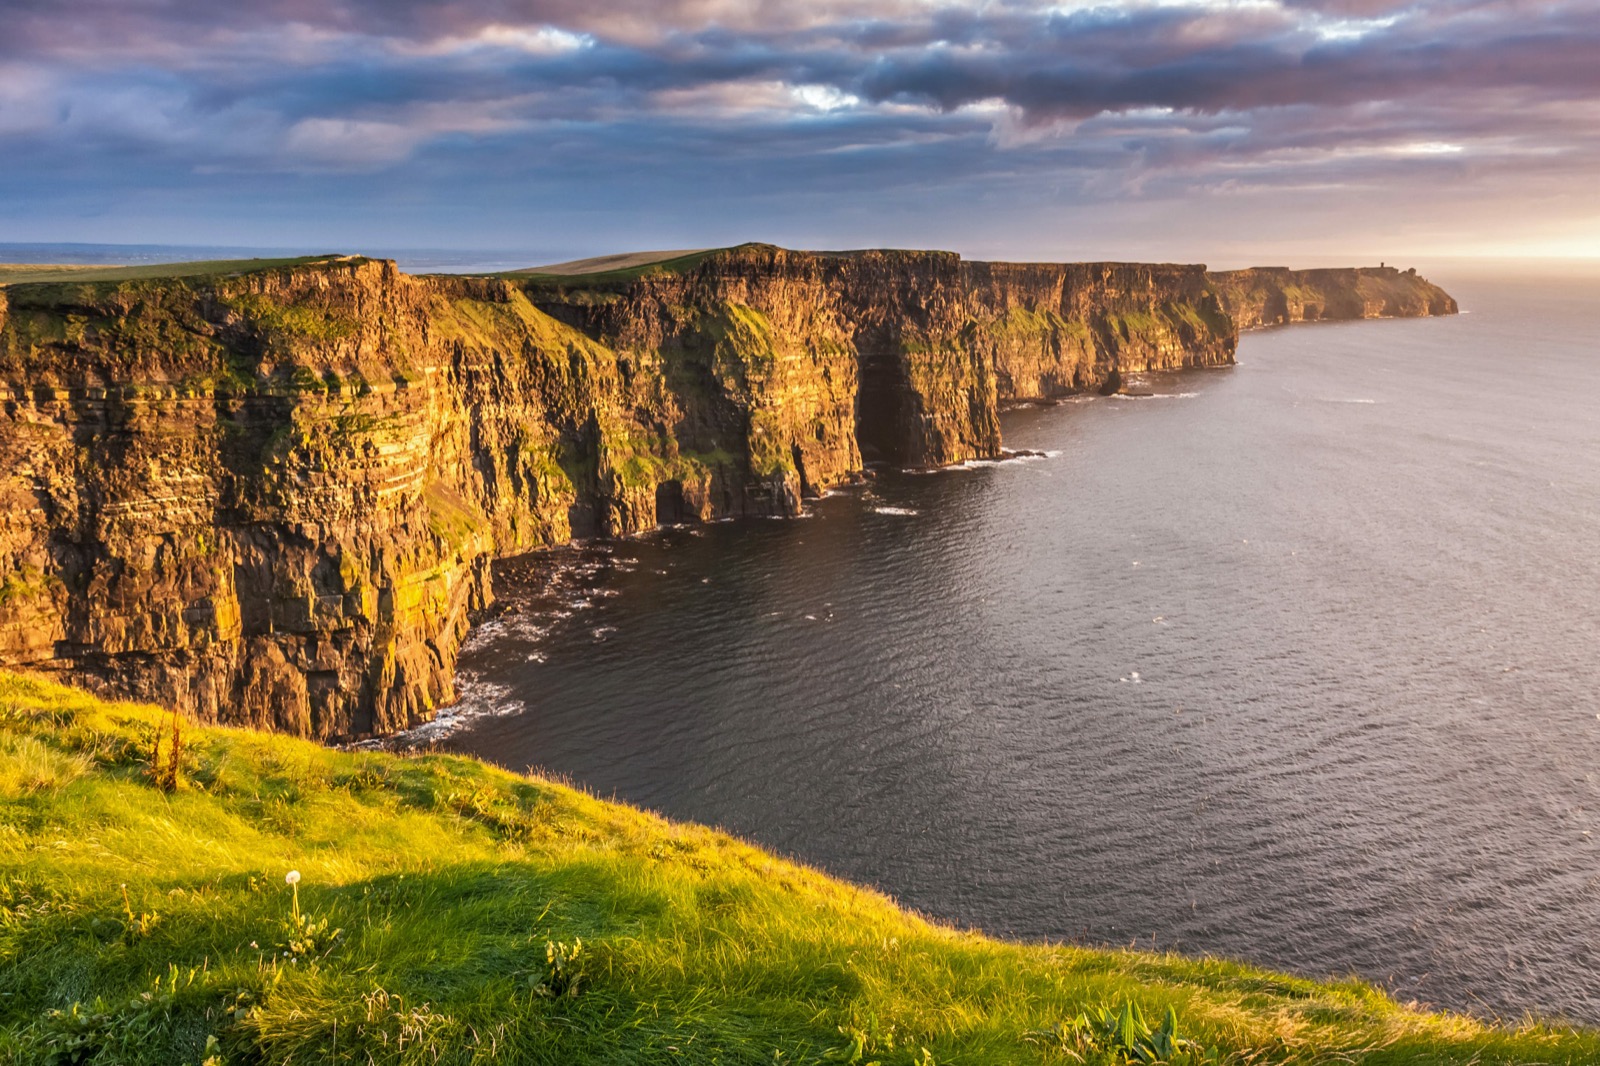 Can You Match These Natural Wonders to Their Locations? Cliffs of Moher, Ireland